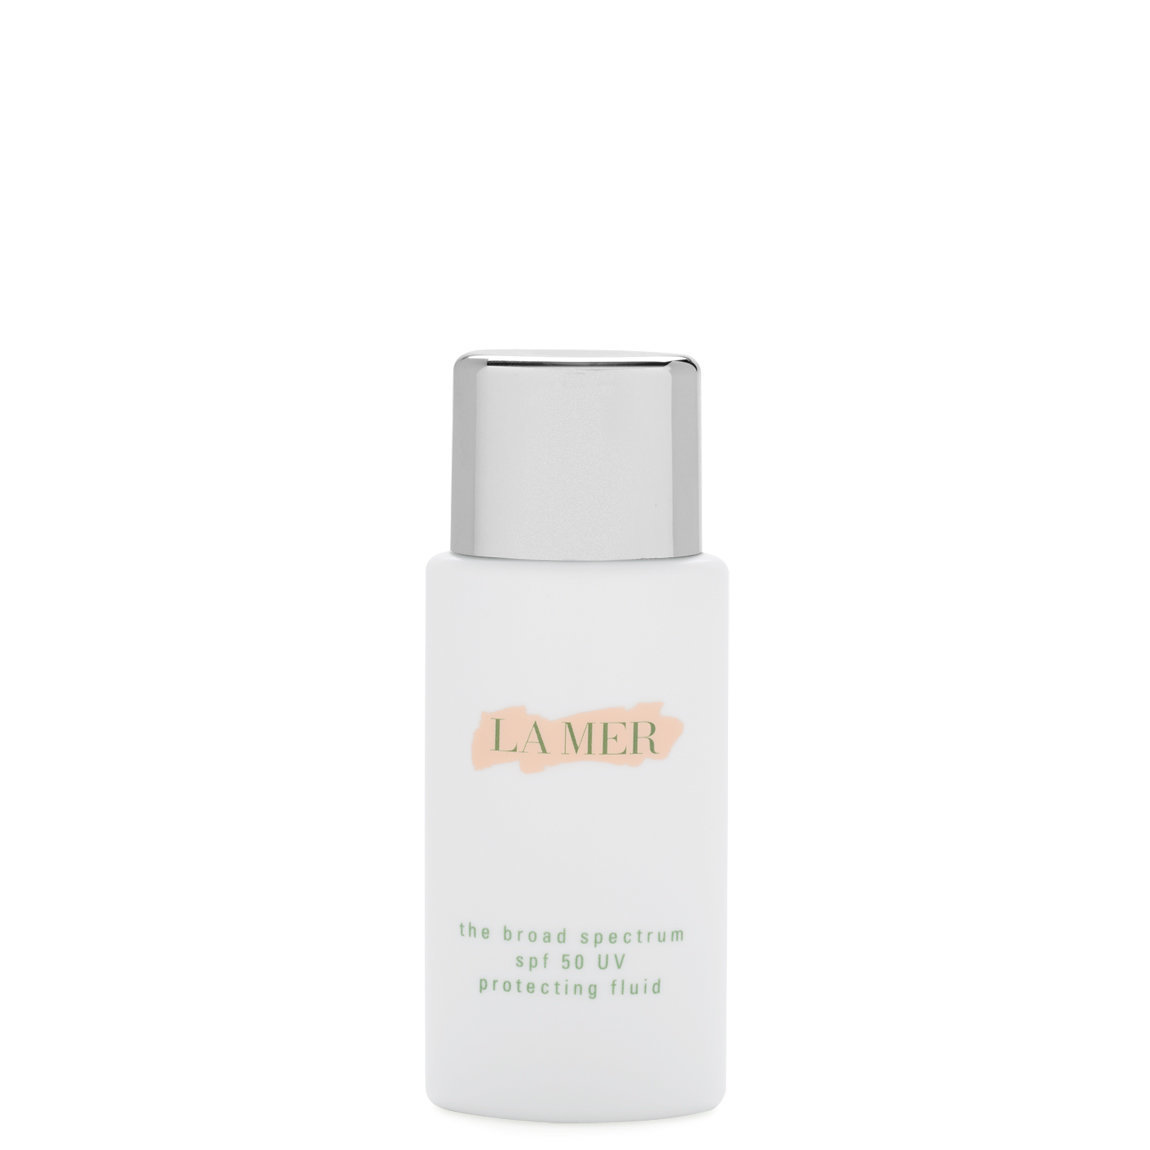 La Mer The SPF 50 UV Protecting Fluid alternative view 1 - product swatch.